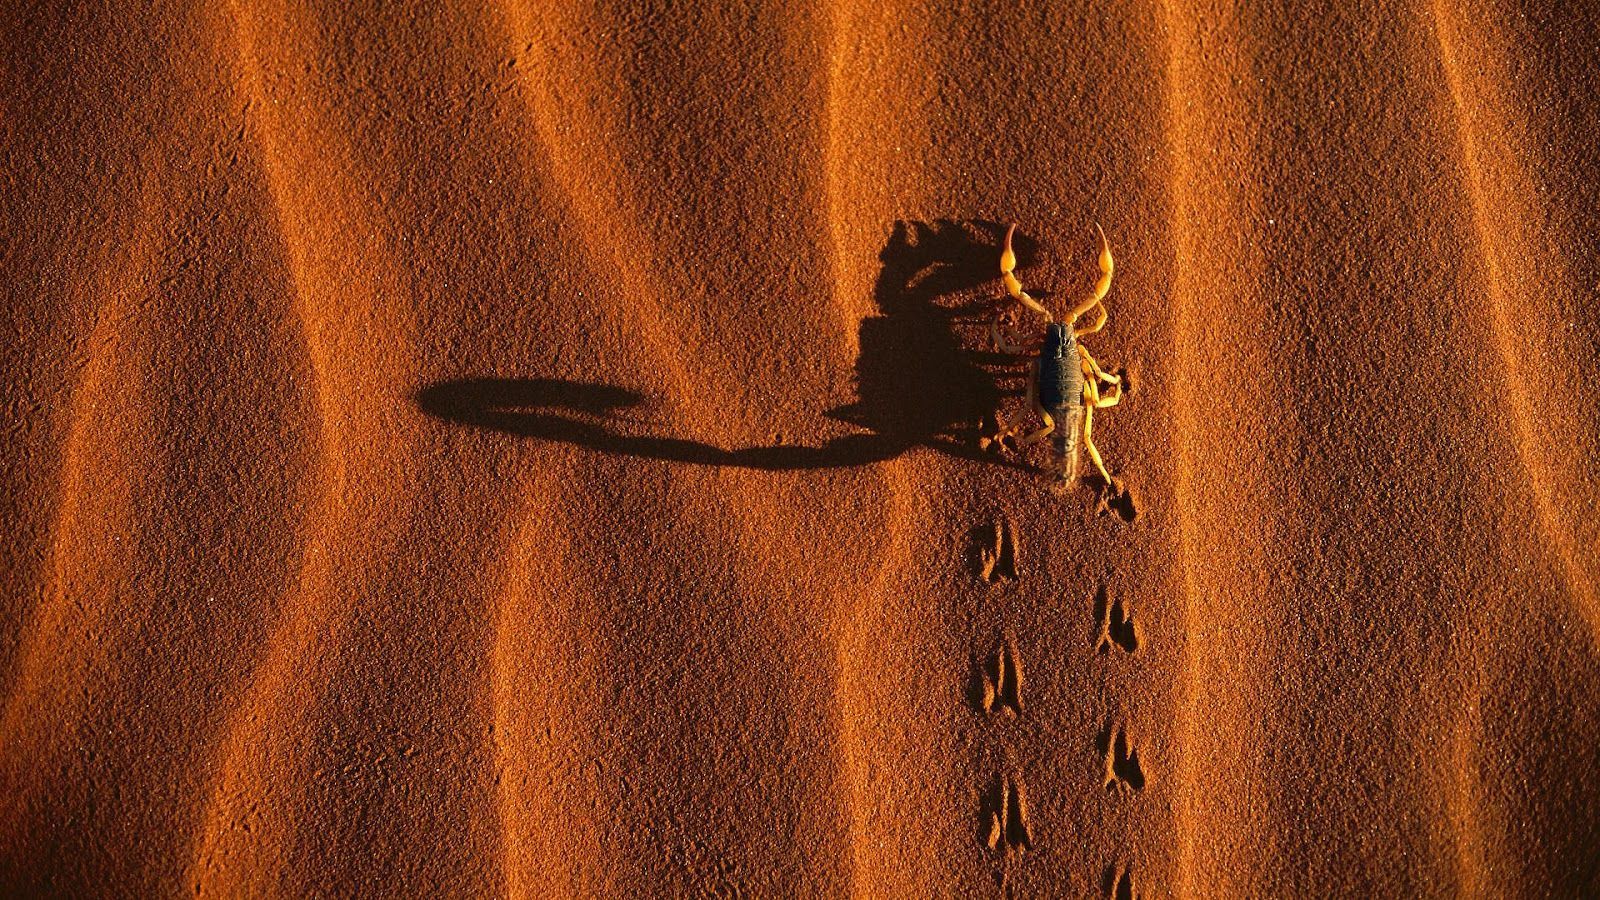 Wallpaper of a scorpion in the desert | HD Animals Wallpapers